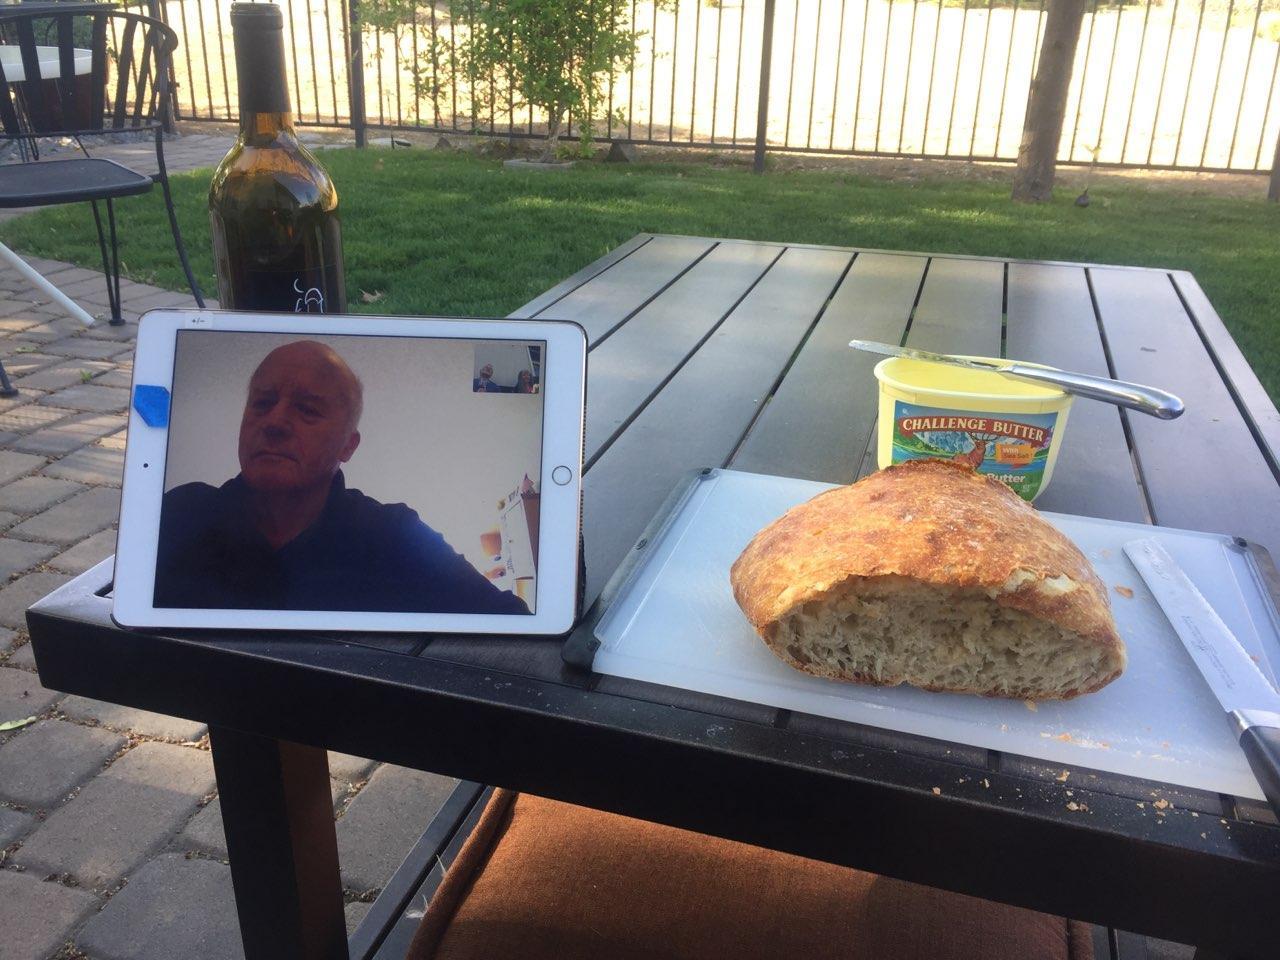 IPad on table with video image of Jim Ashurst. On table is a bottle of wine, sourdough bread and margarine.